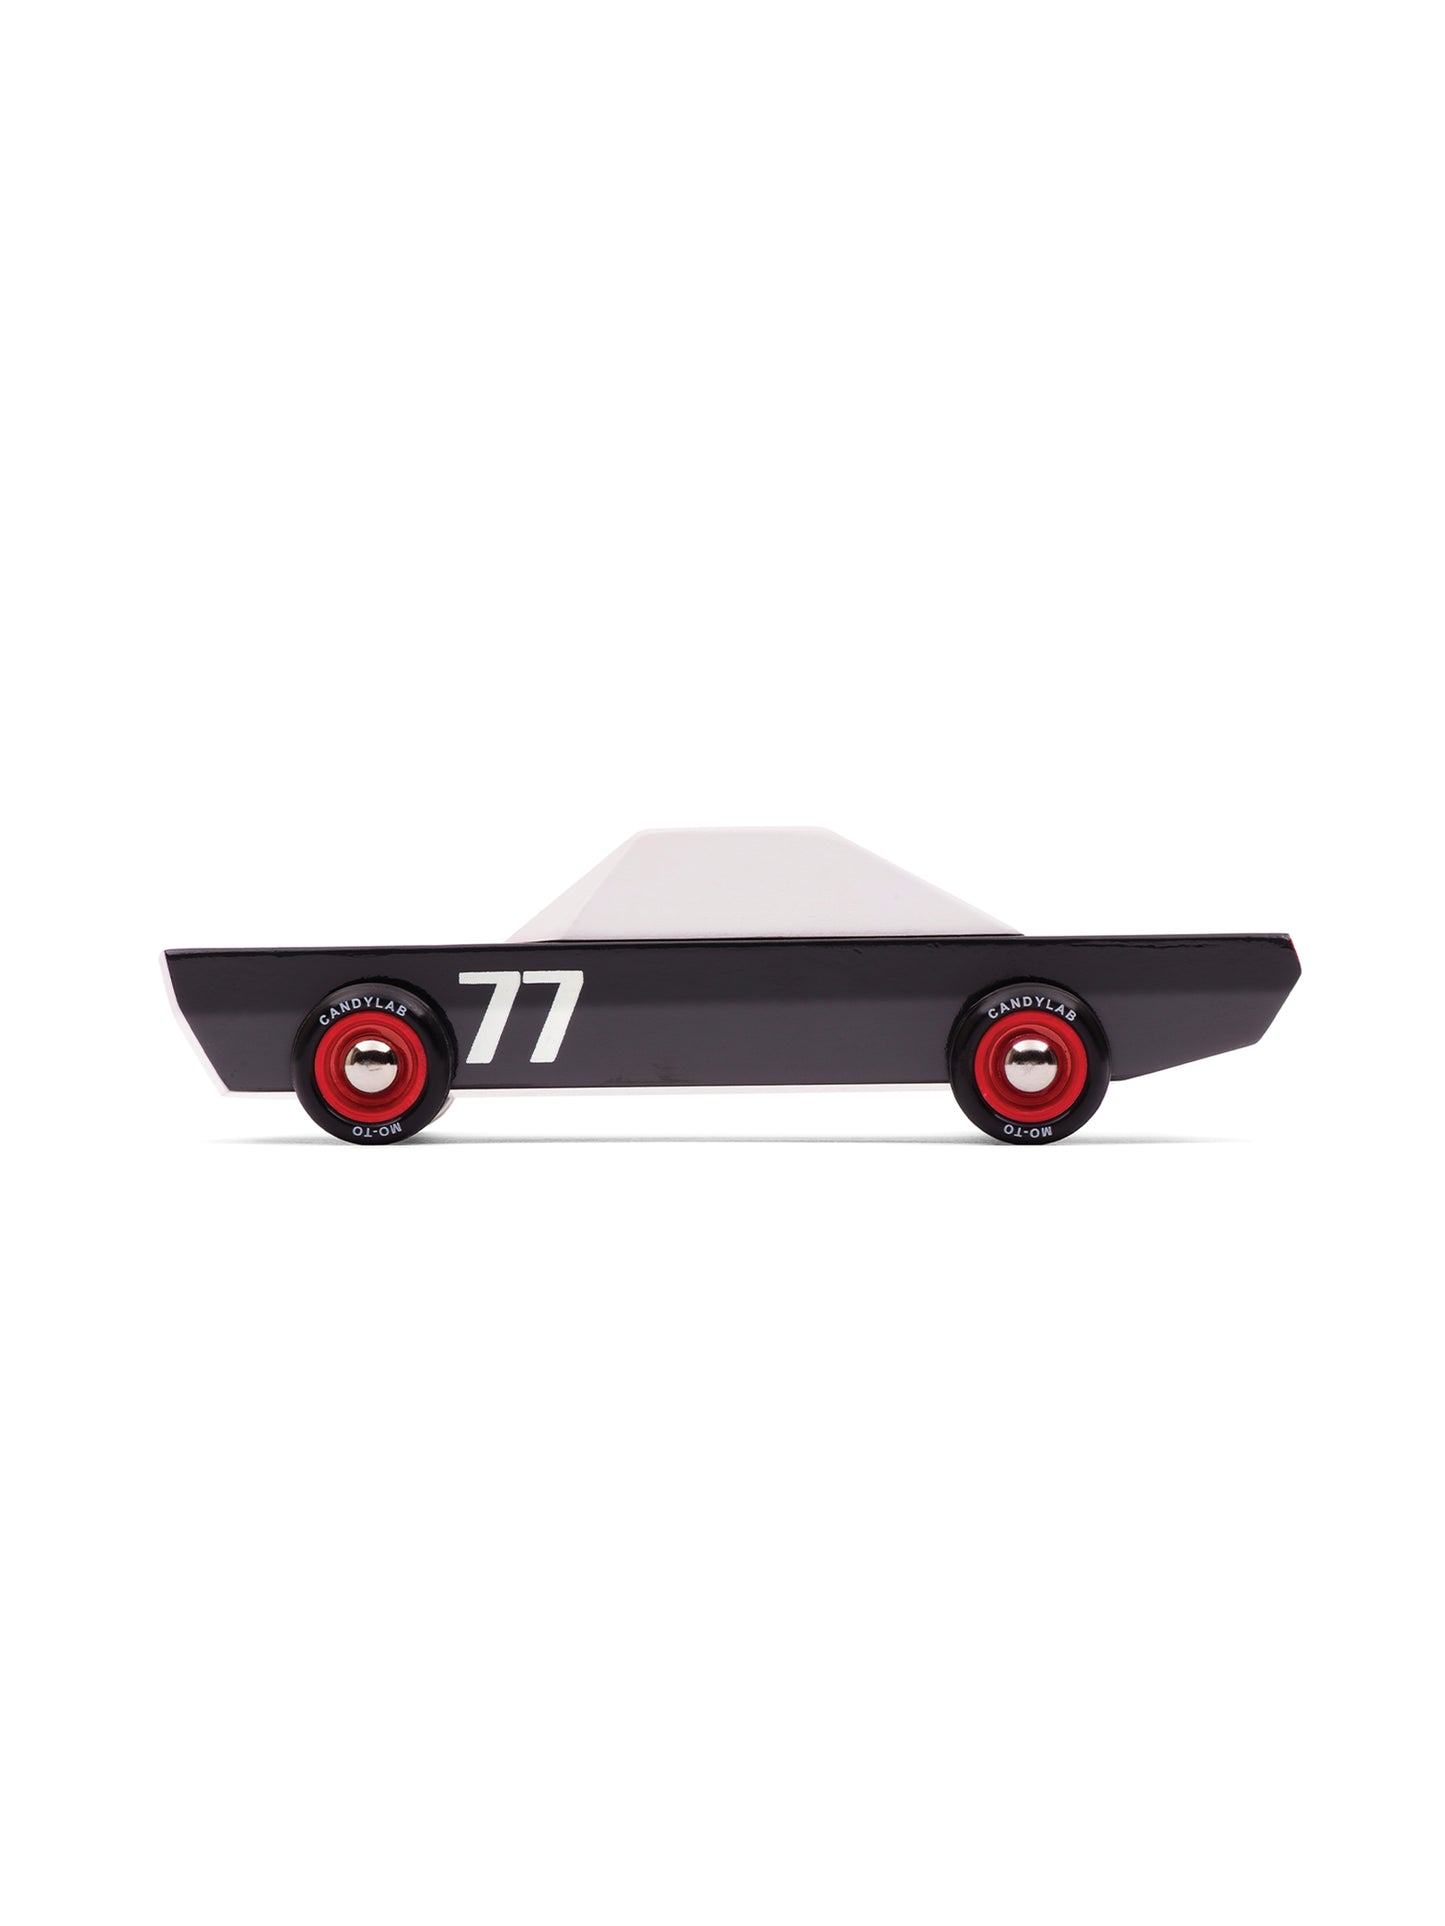 Candylab Toys Carbon 77 Weston Table